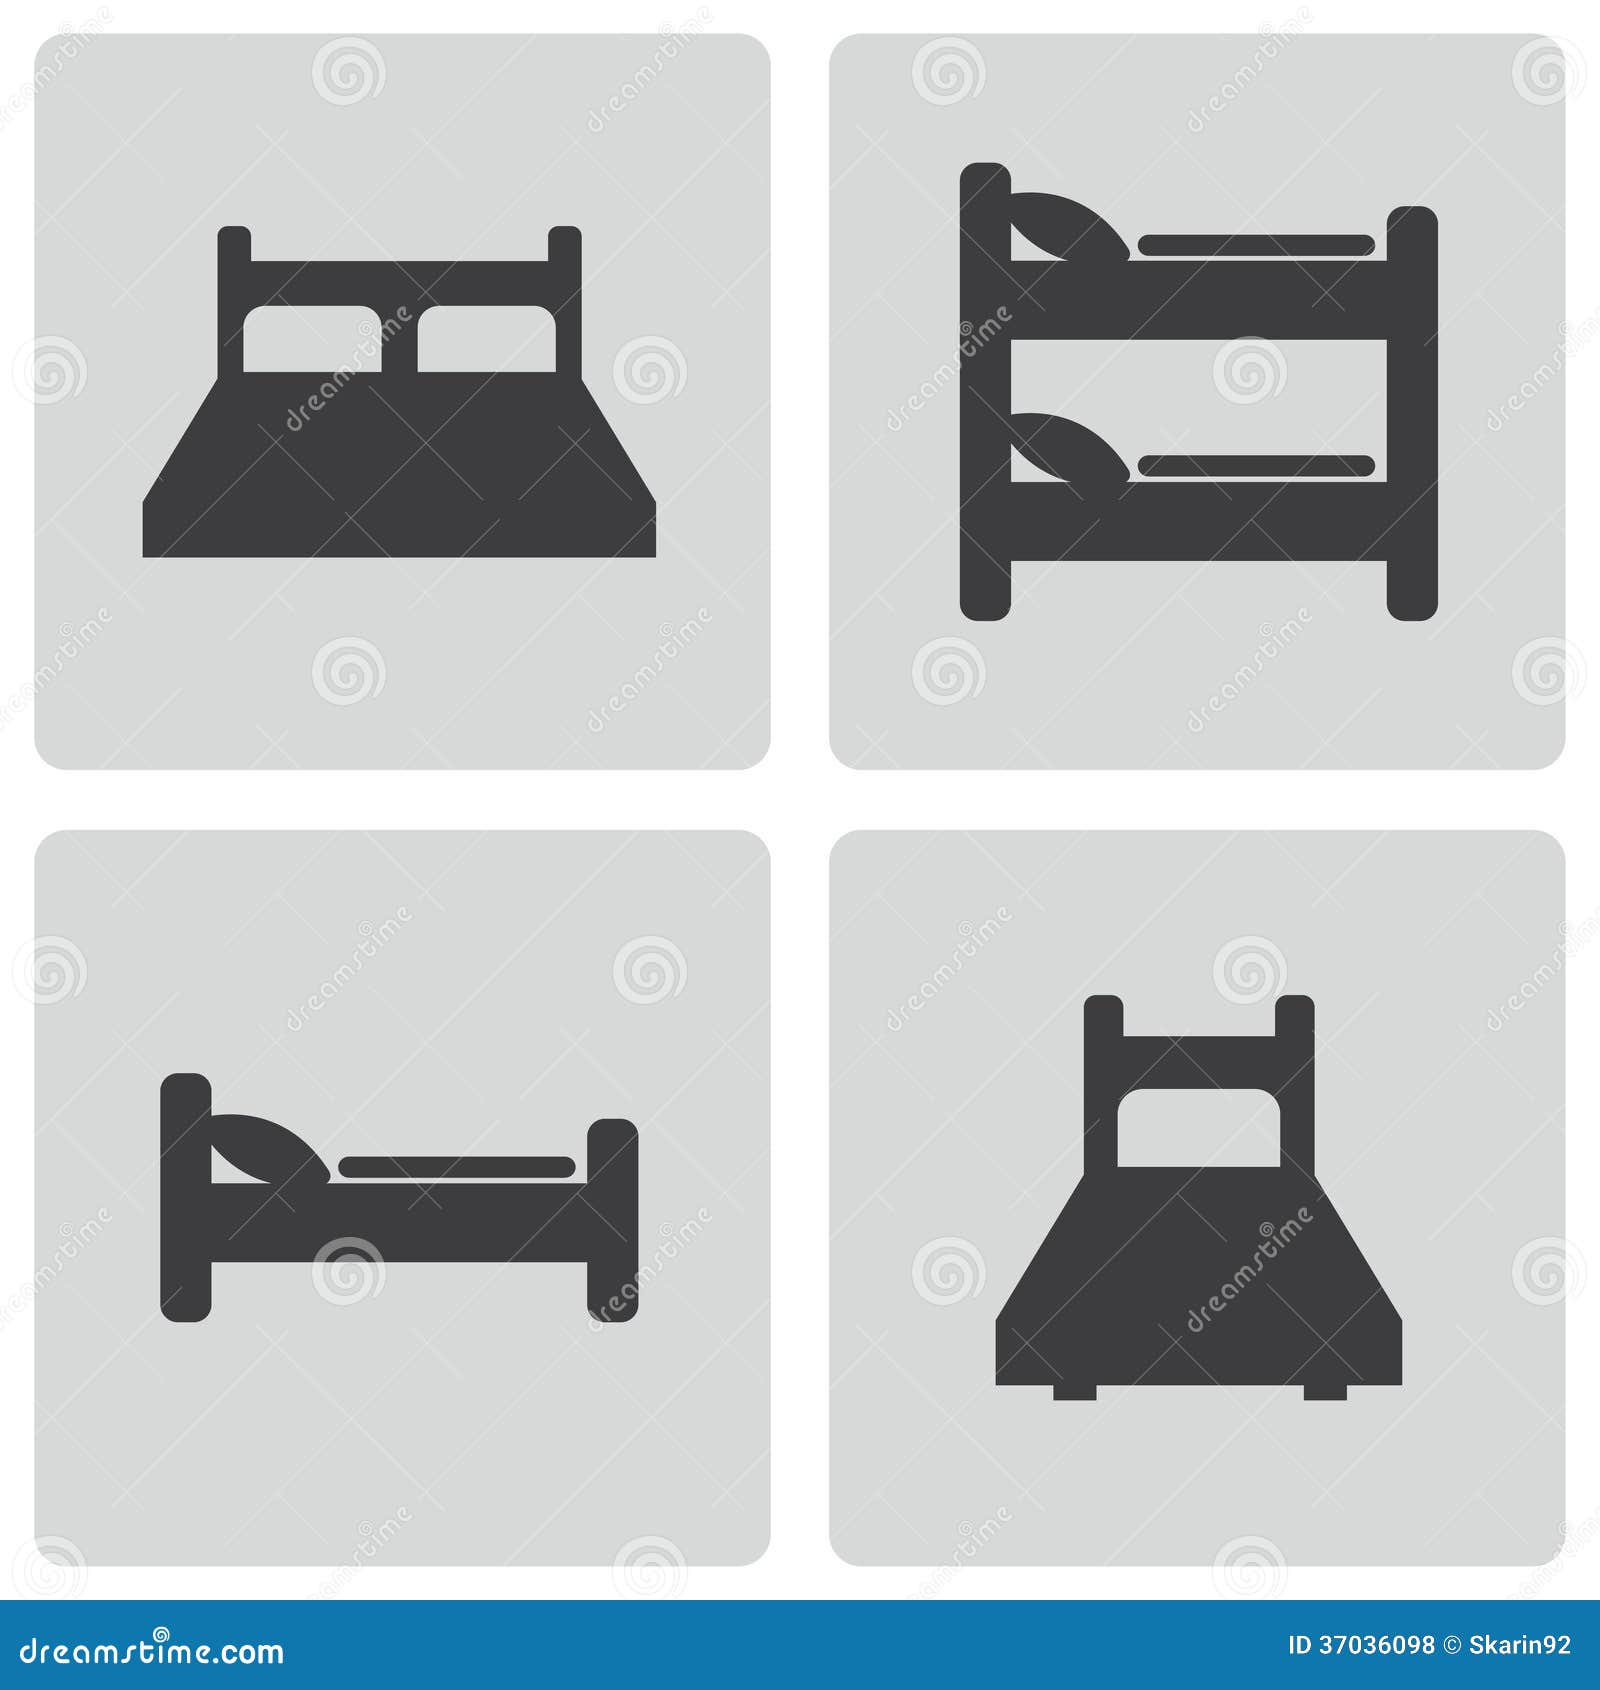 Vector Black Bed Icons Set Royalty Free Stock Photos - Image: 37036098